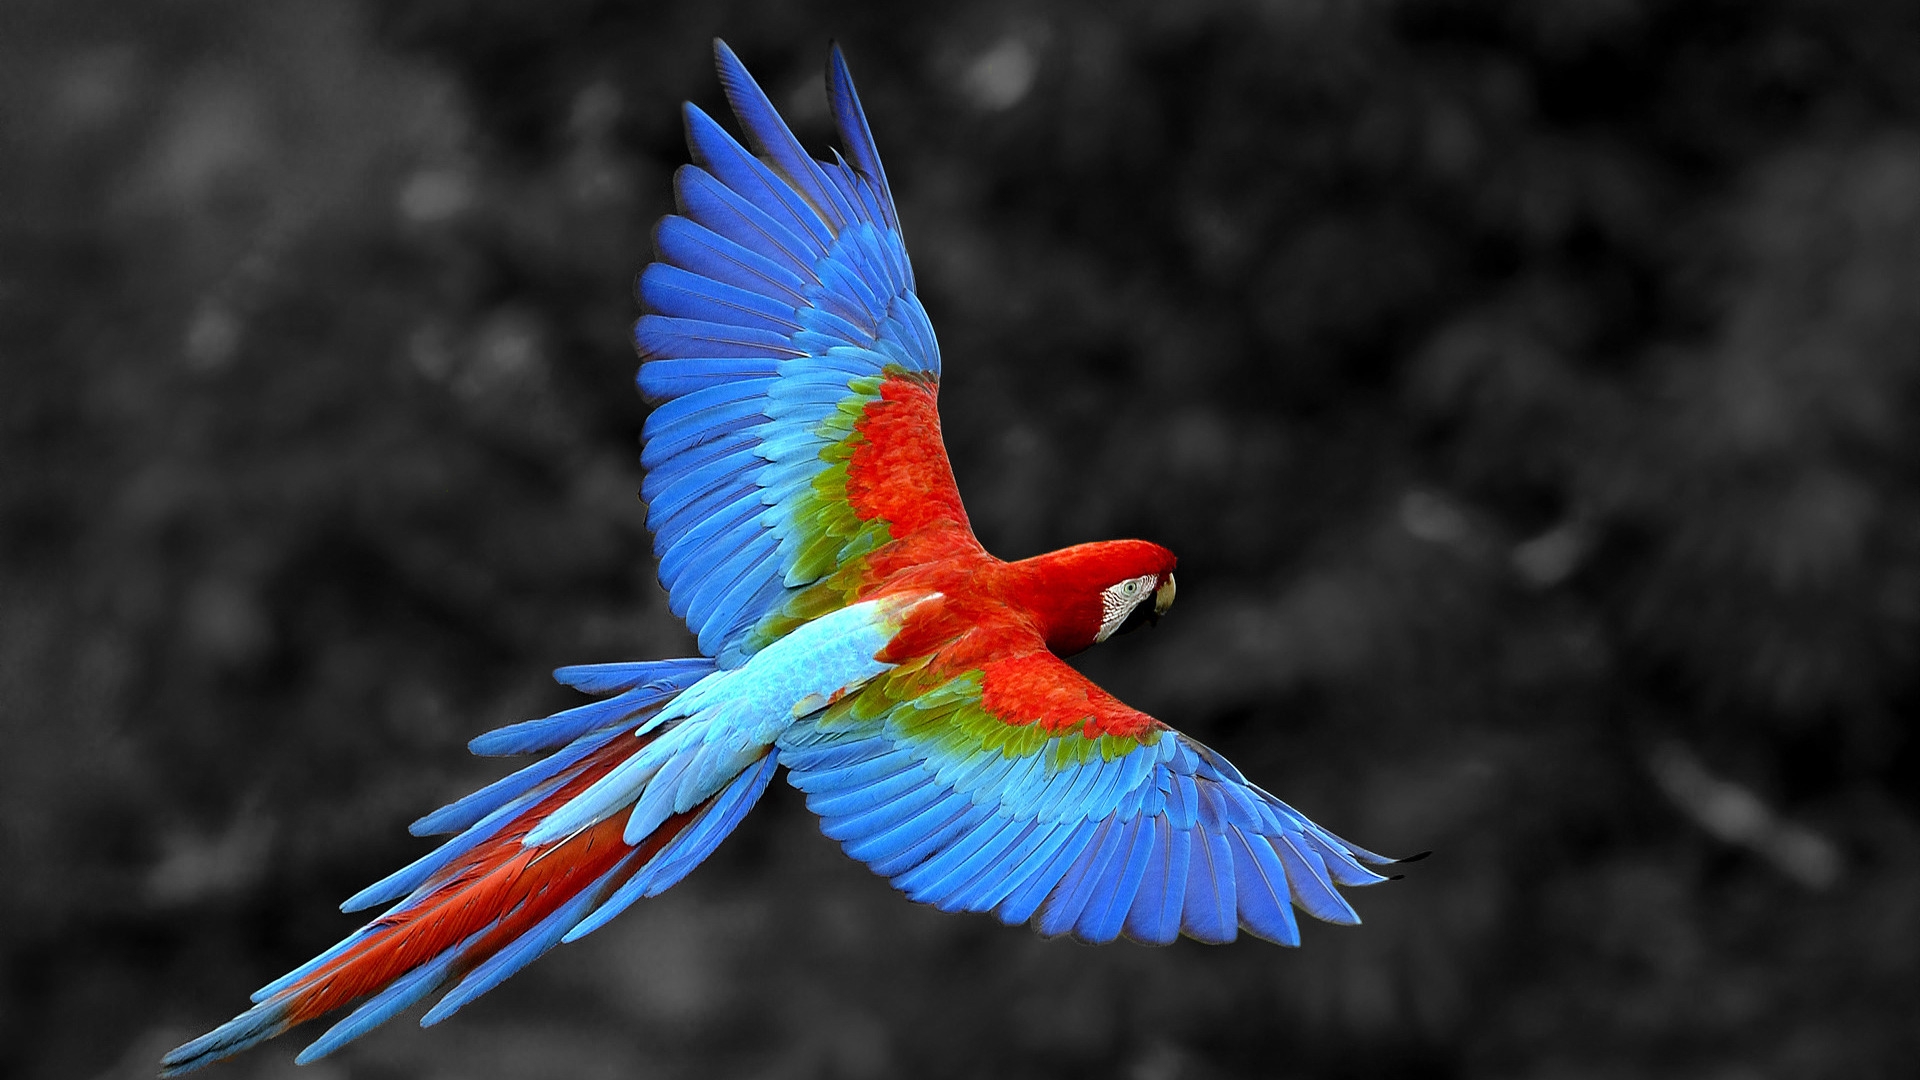 Great Colorful Parrot for 1920 x 1080 HDTV 1080p resolution